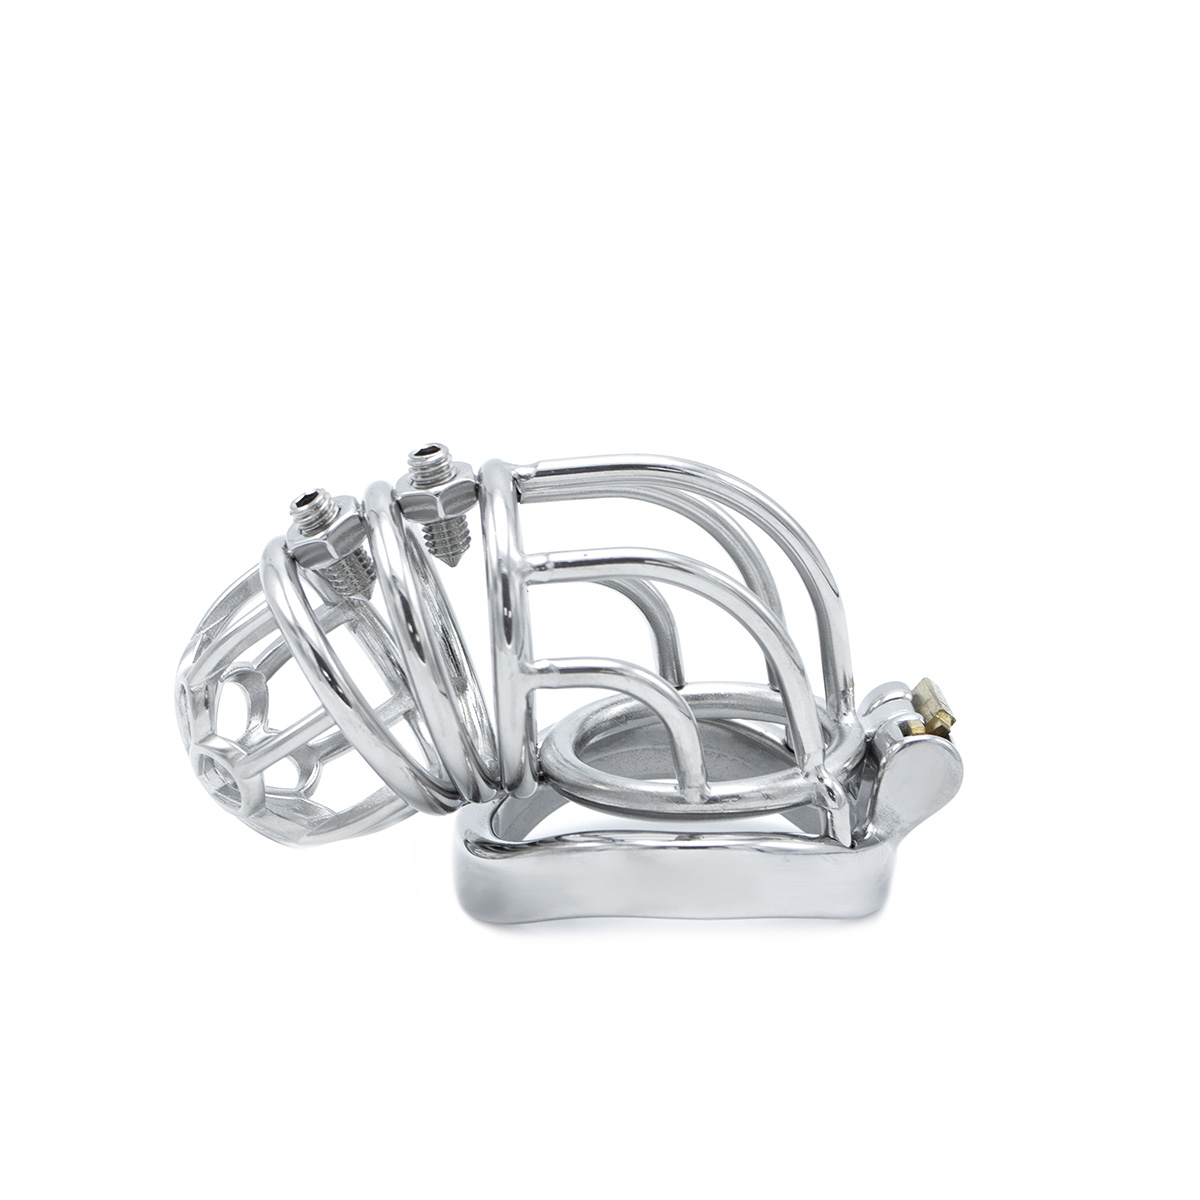 Cruve-Torture-Chastity-Device-OPR-278008-3